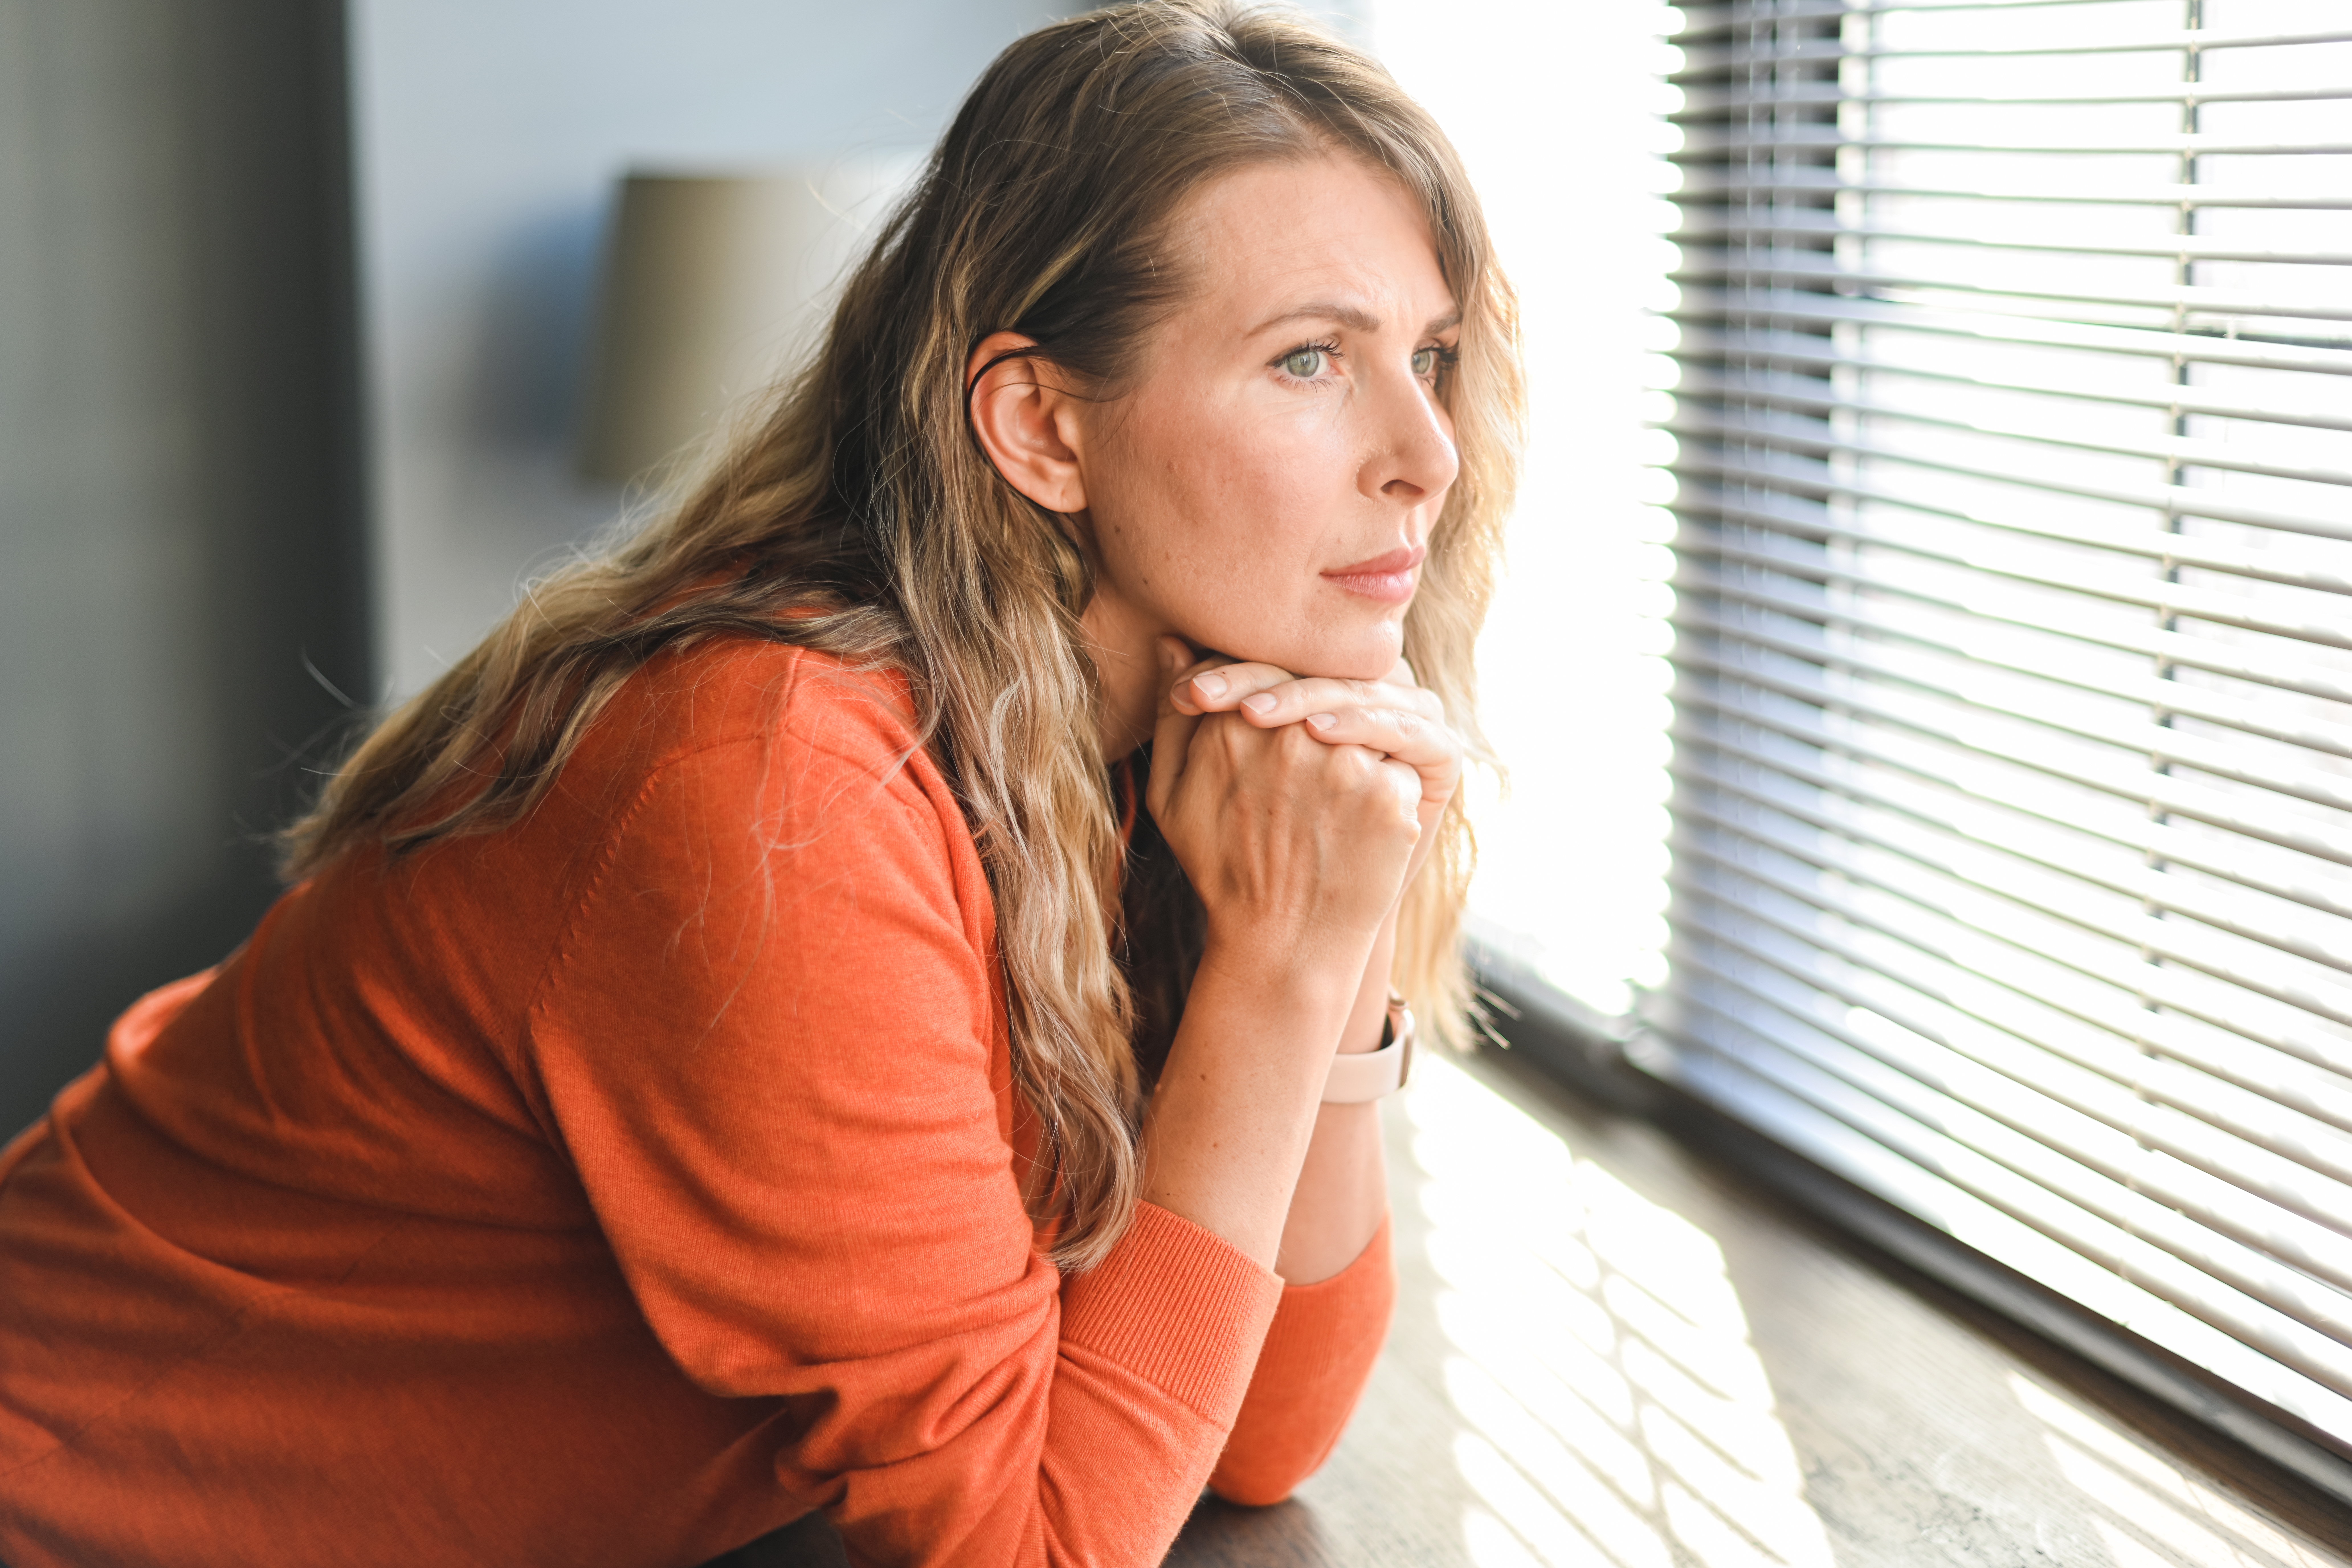 Mature adult woman (negative emotions) | Source: Getty Images